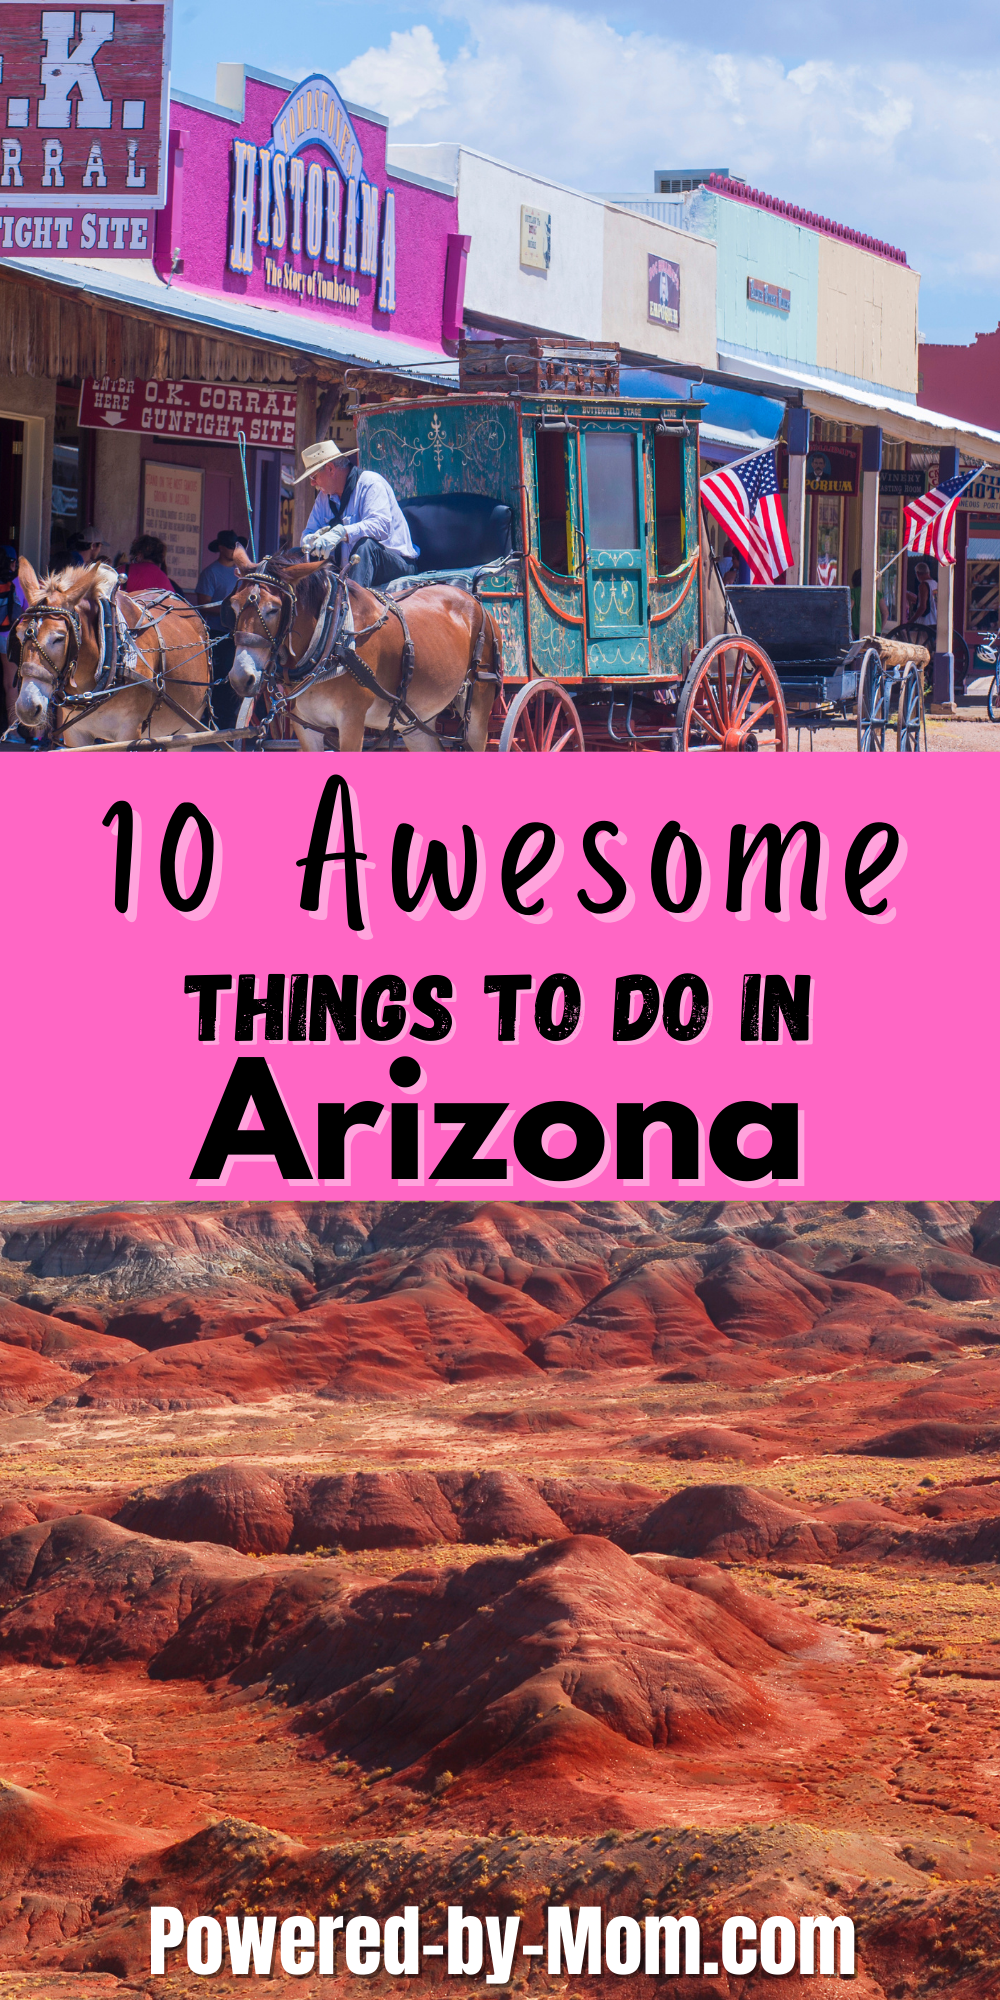 If you're planning a big vacation to Arizona, you definitely don't want to miss anything. Here are ten awesome ideas for your next visit!